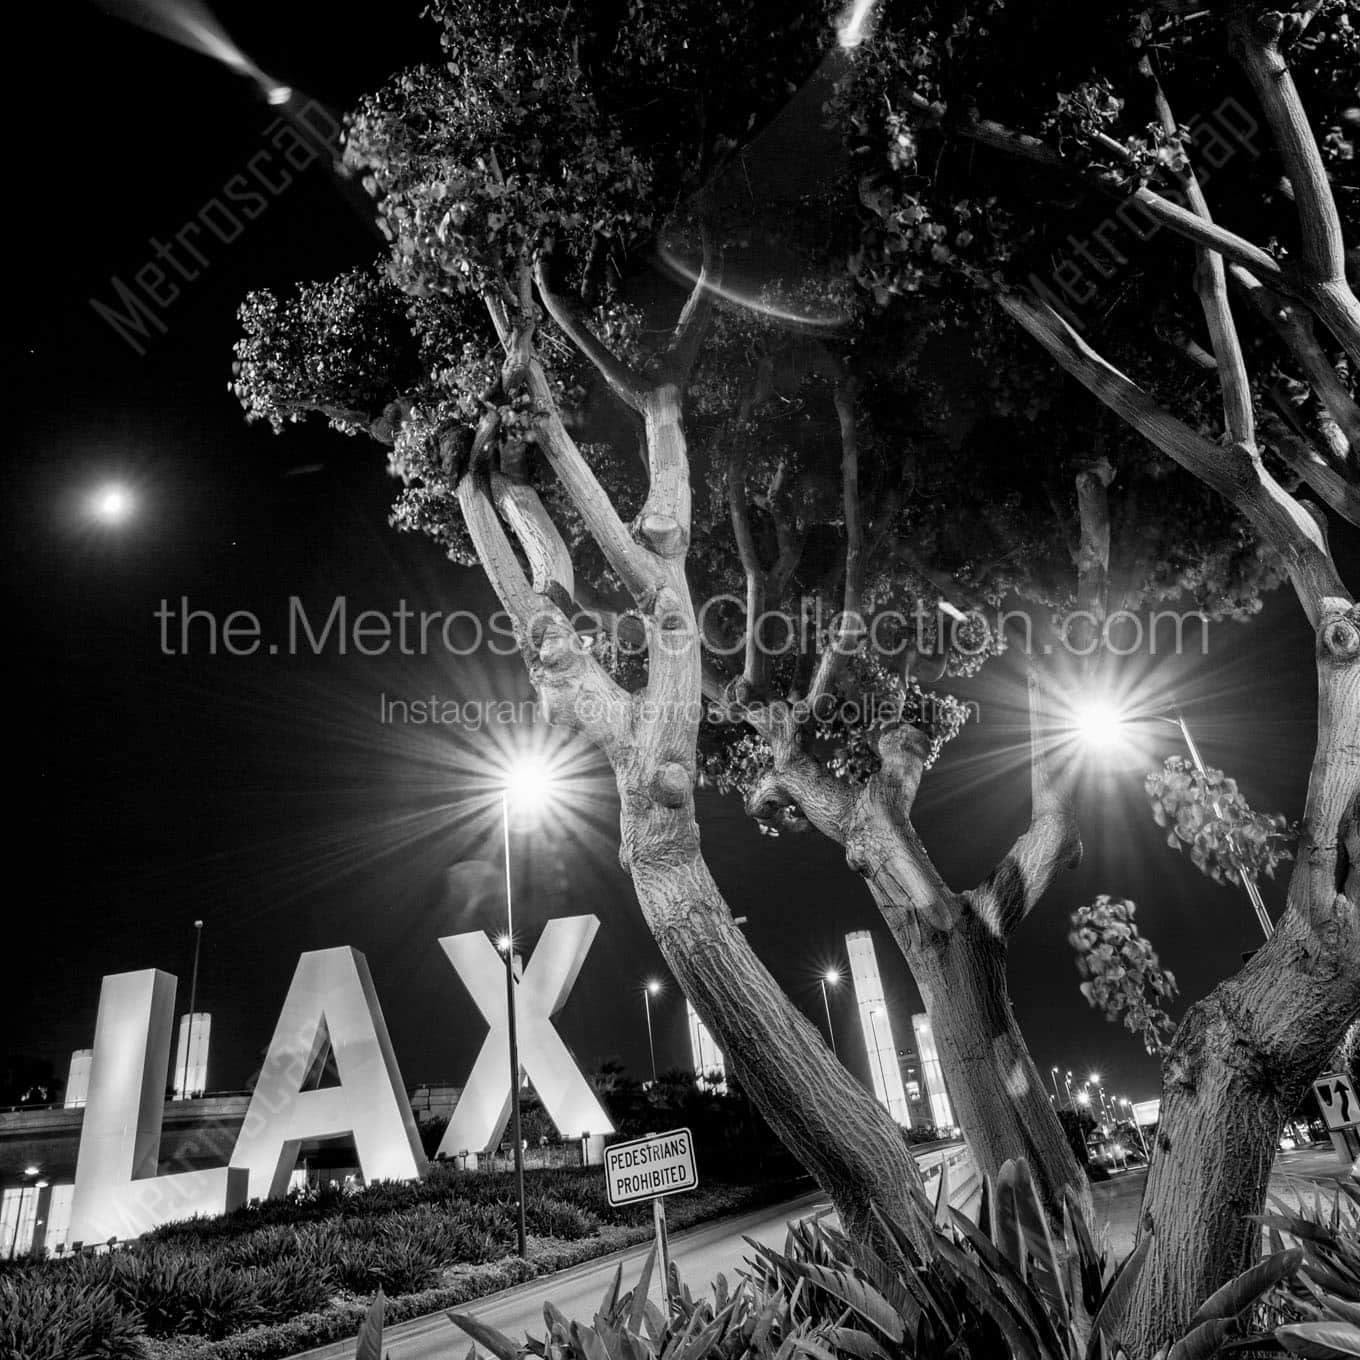 the lax sign at night Black & White Office Art